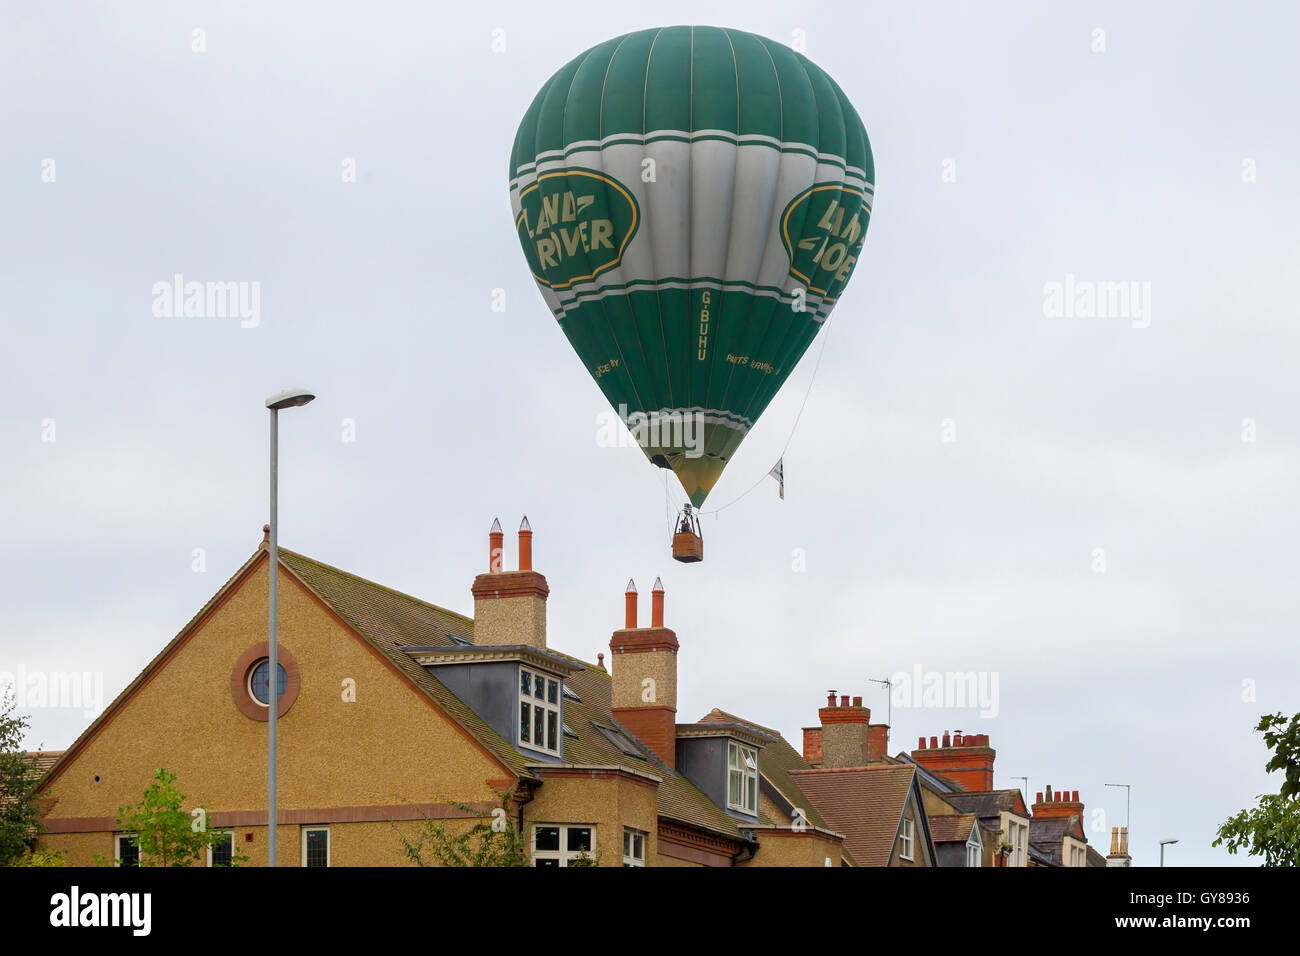 Northampton U.K. Abington Park, 18th Sept 2016. Land Rover hot air balloon flying low over the rooftops managed to gain some height so as not to land in Abington Park. Credit:  Keith J Smith./Alamy Live News Stock Photo